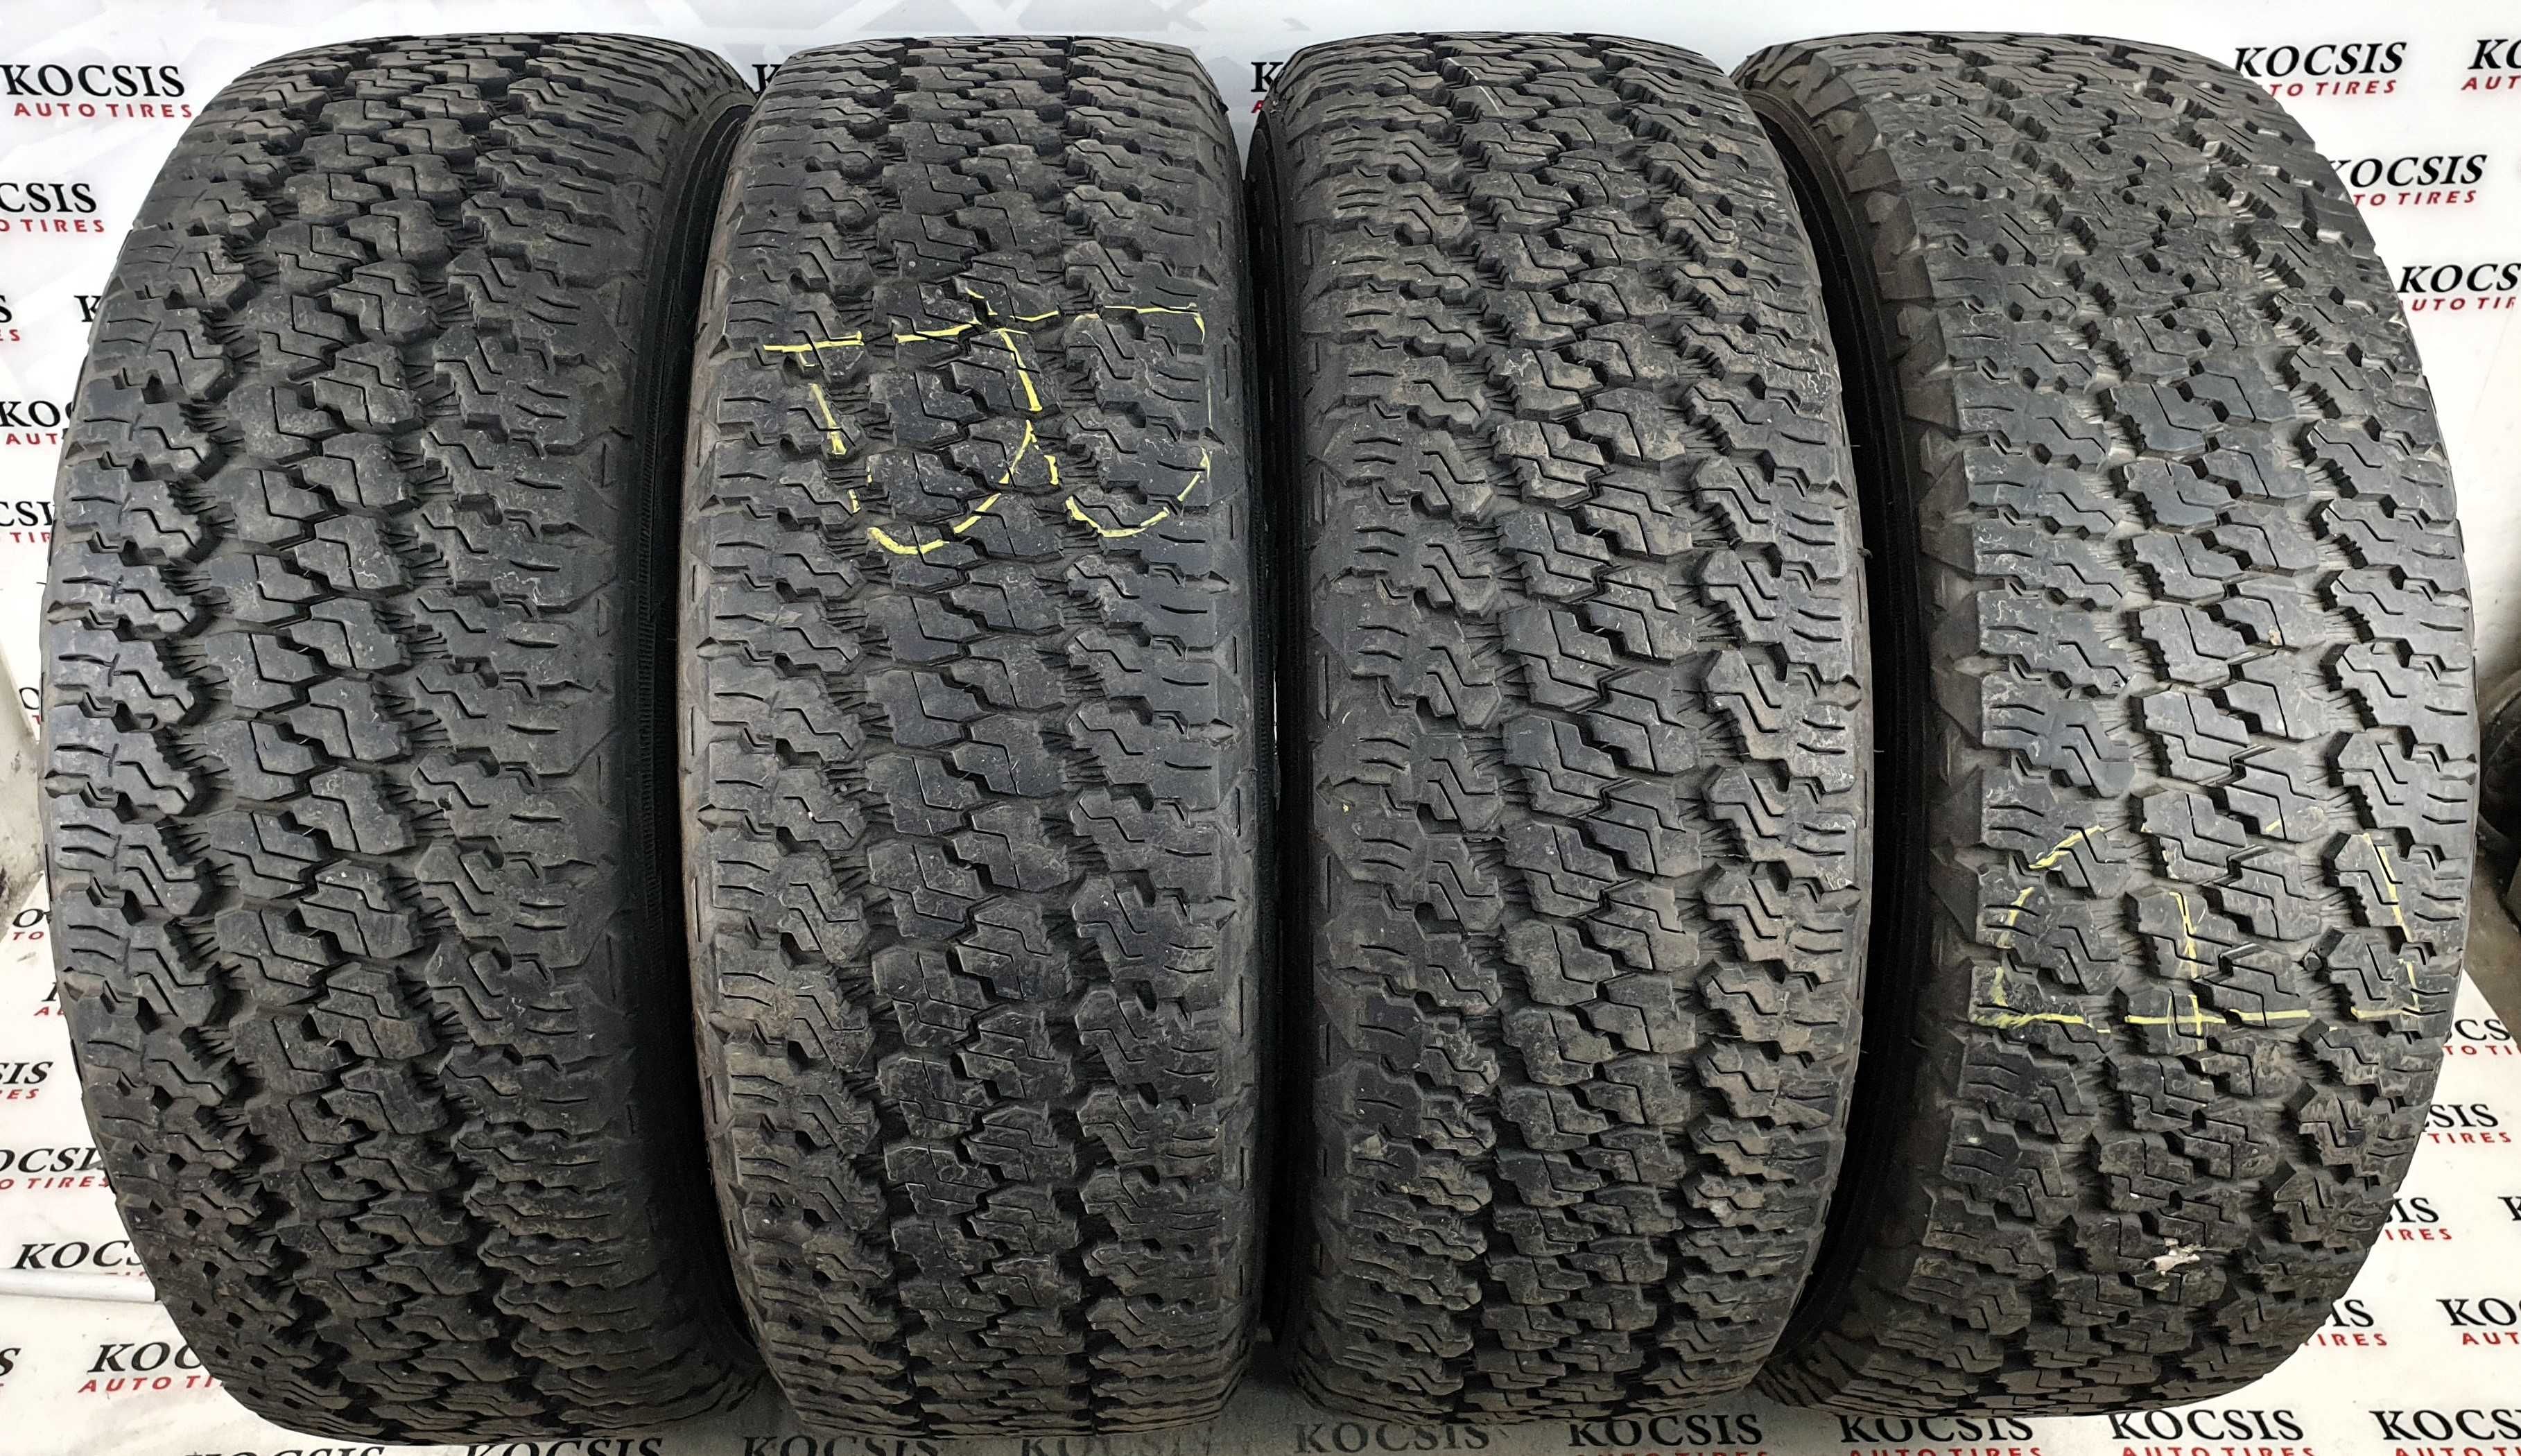 Anvelope second hand A/T 275 60 20 Goodyear